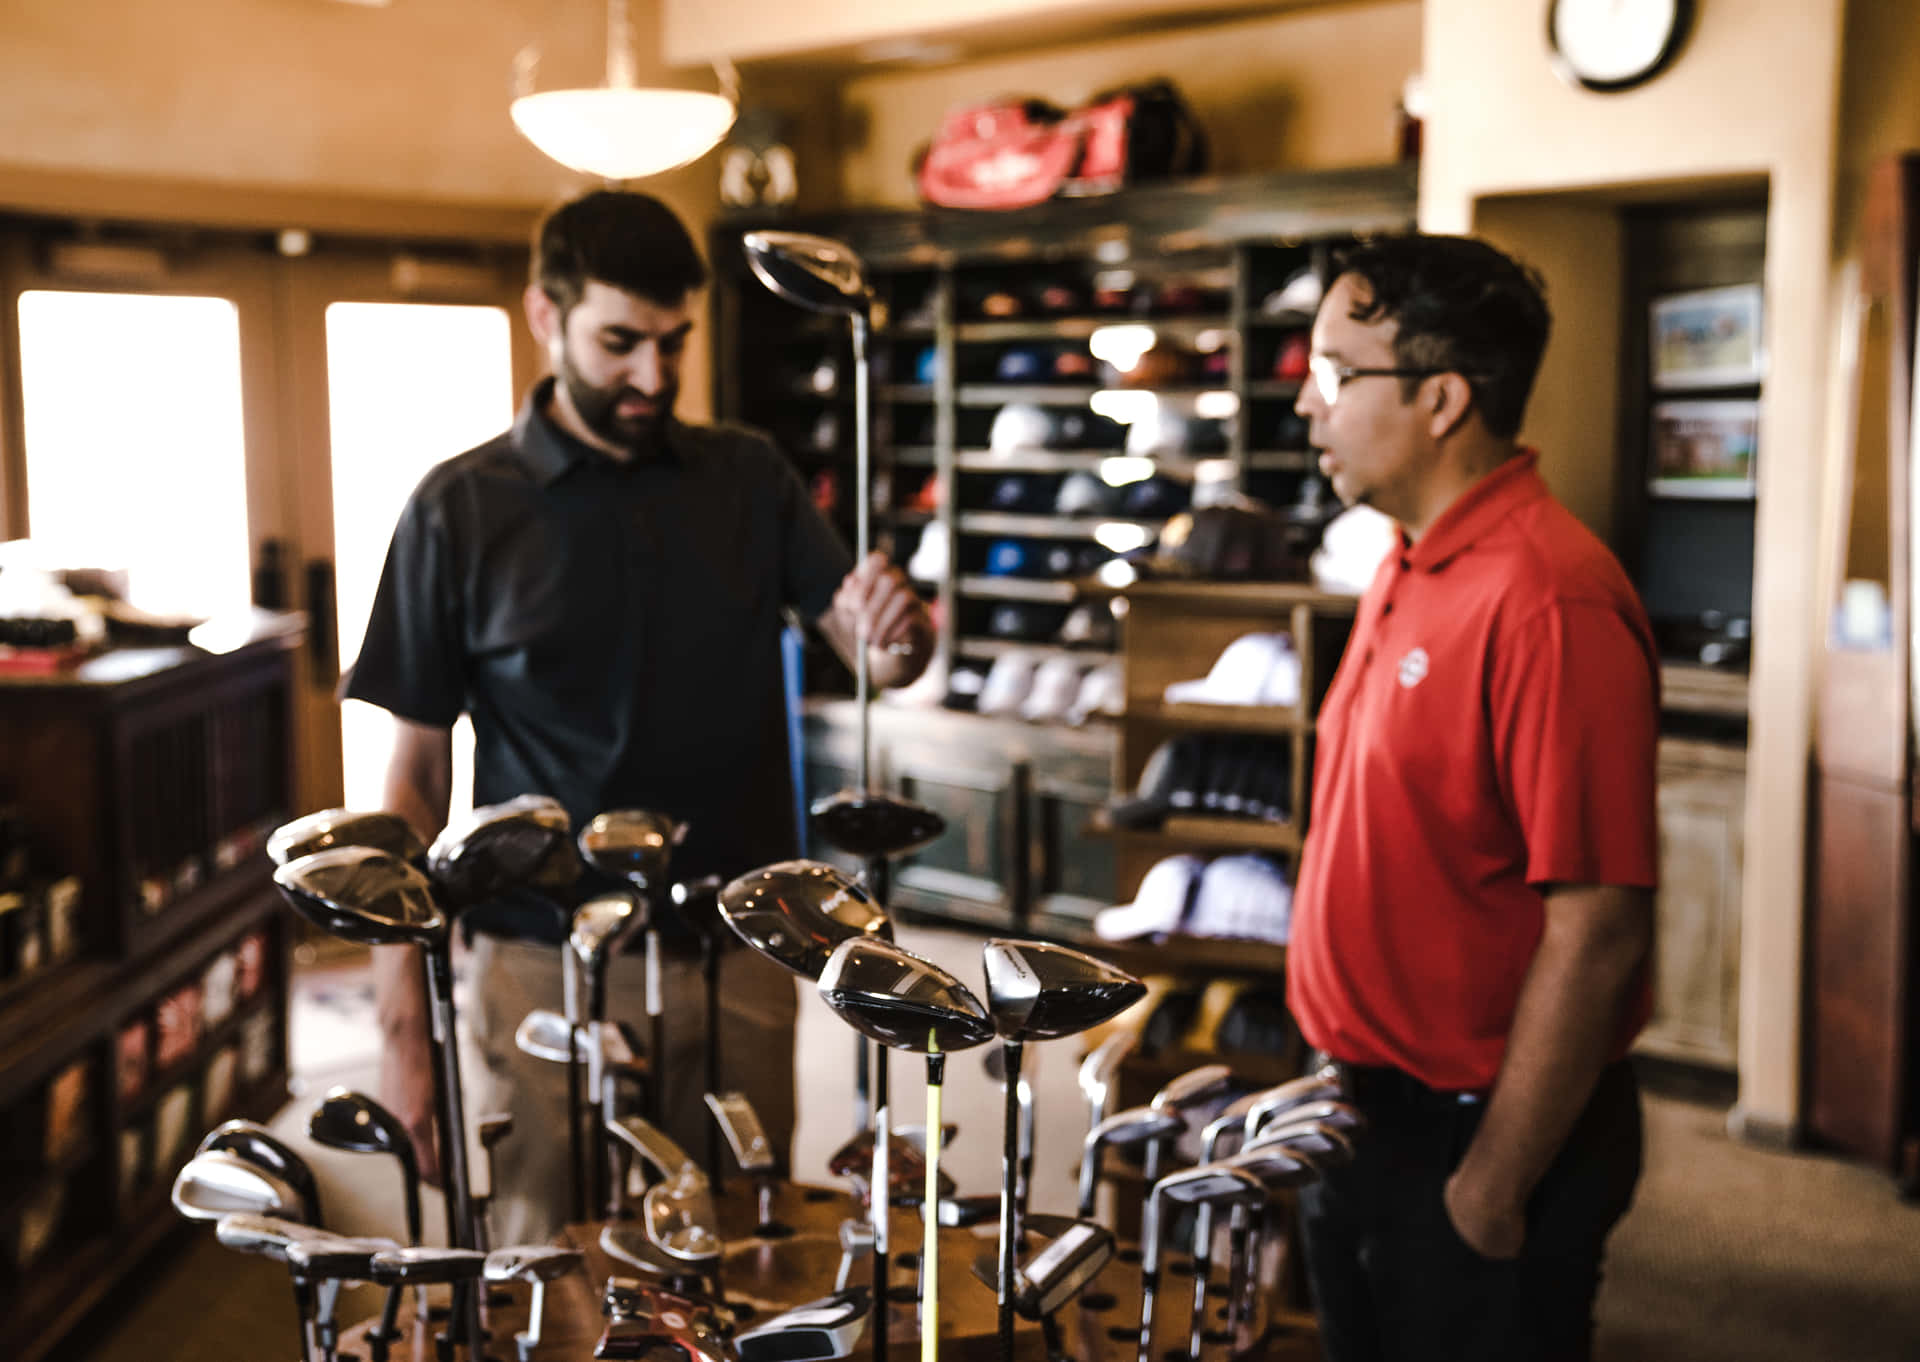 Two Men Standing In A Golf Shop Looking At Golf Clubs